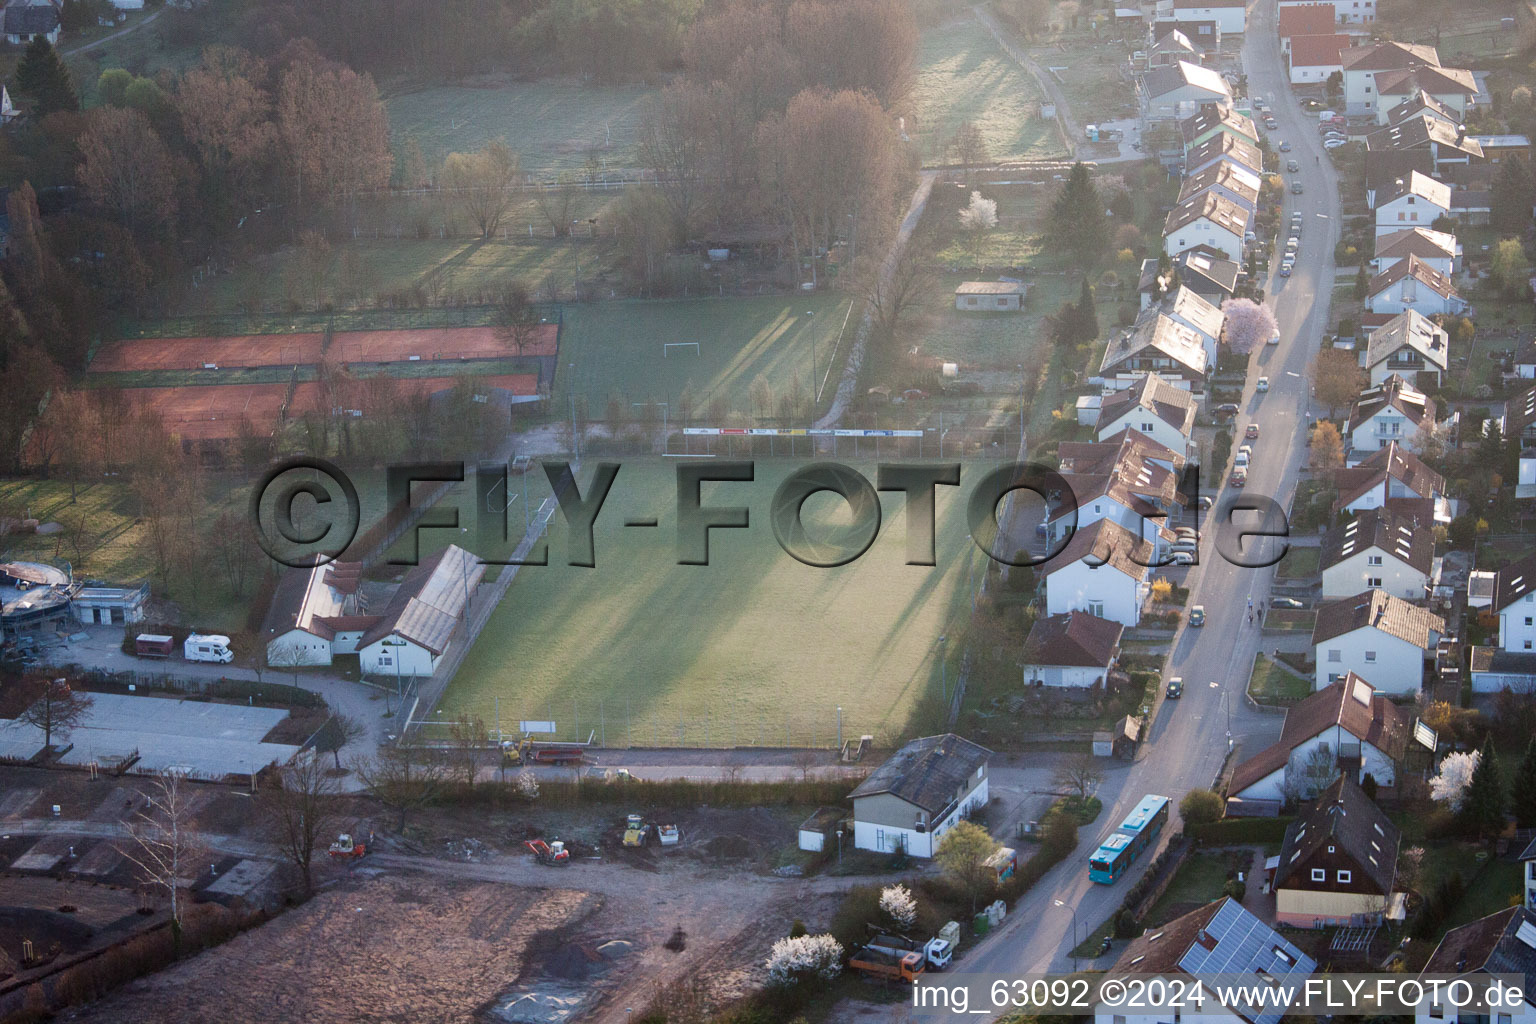 Sports fields in the district Ingenheim in Billigheim-Ingenheim in the state Rhineland-Palatinate, Germany from the drone perspective